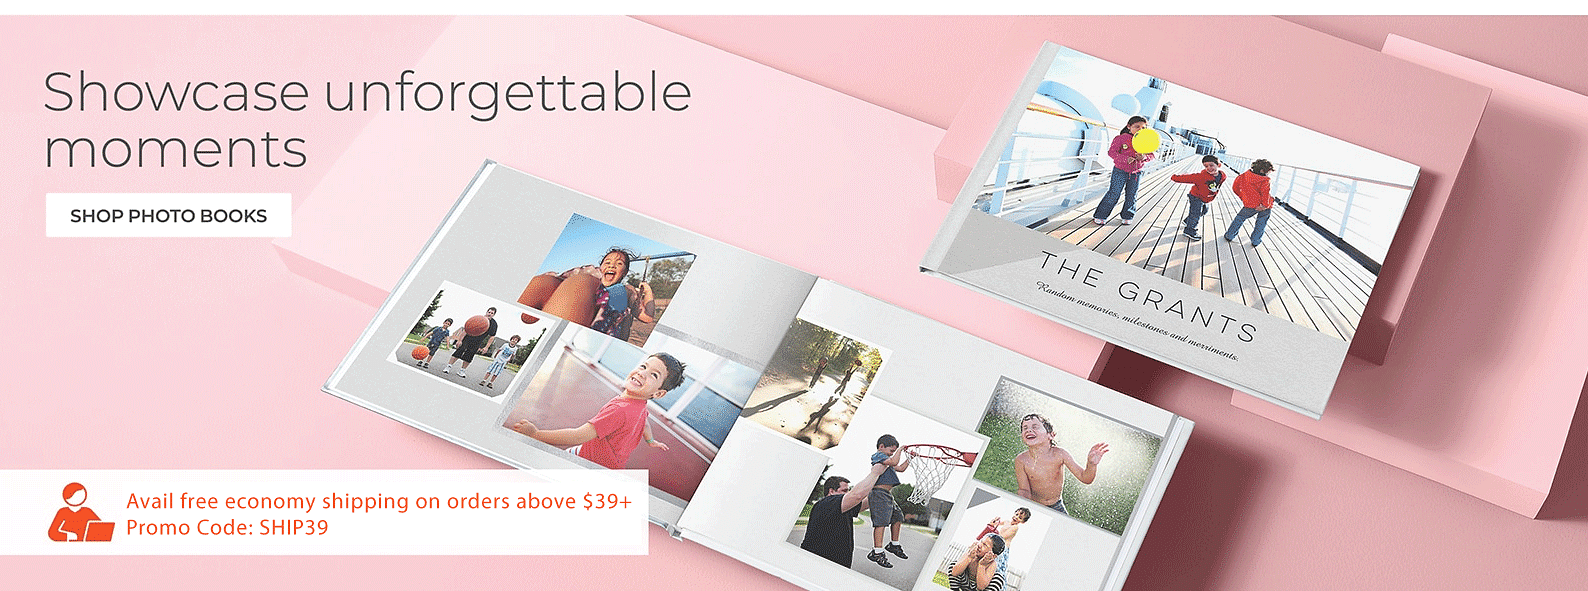 Shutterfly Coupons For Free Shipping Applicable On All Categories August Special